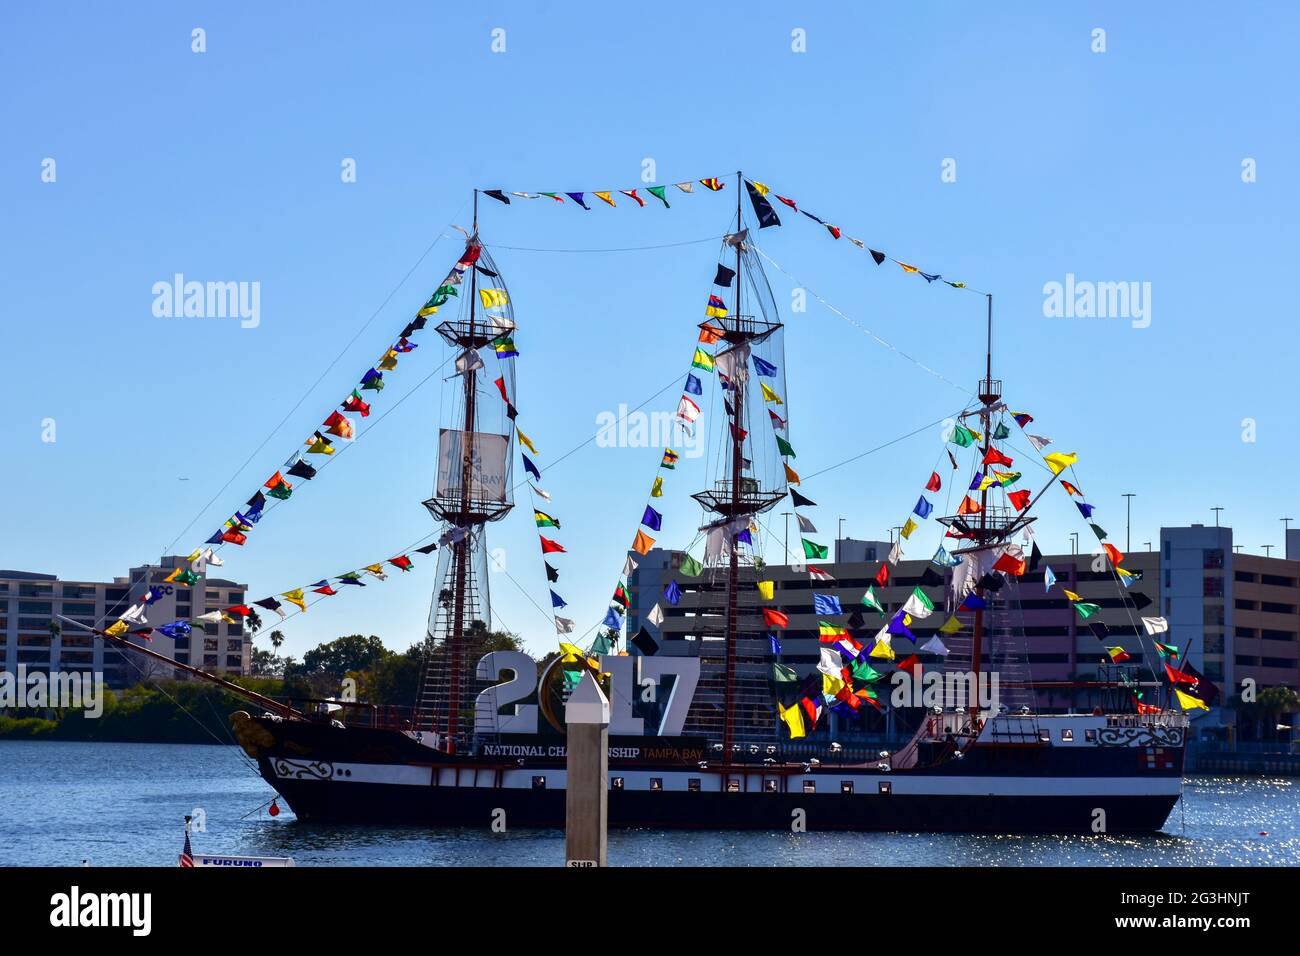 Sailing around Tampa Bay, the tall ship Jose Gasparilla is decorated for the 2017 college football national championship. Stock Photo